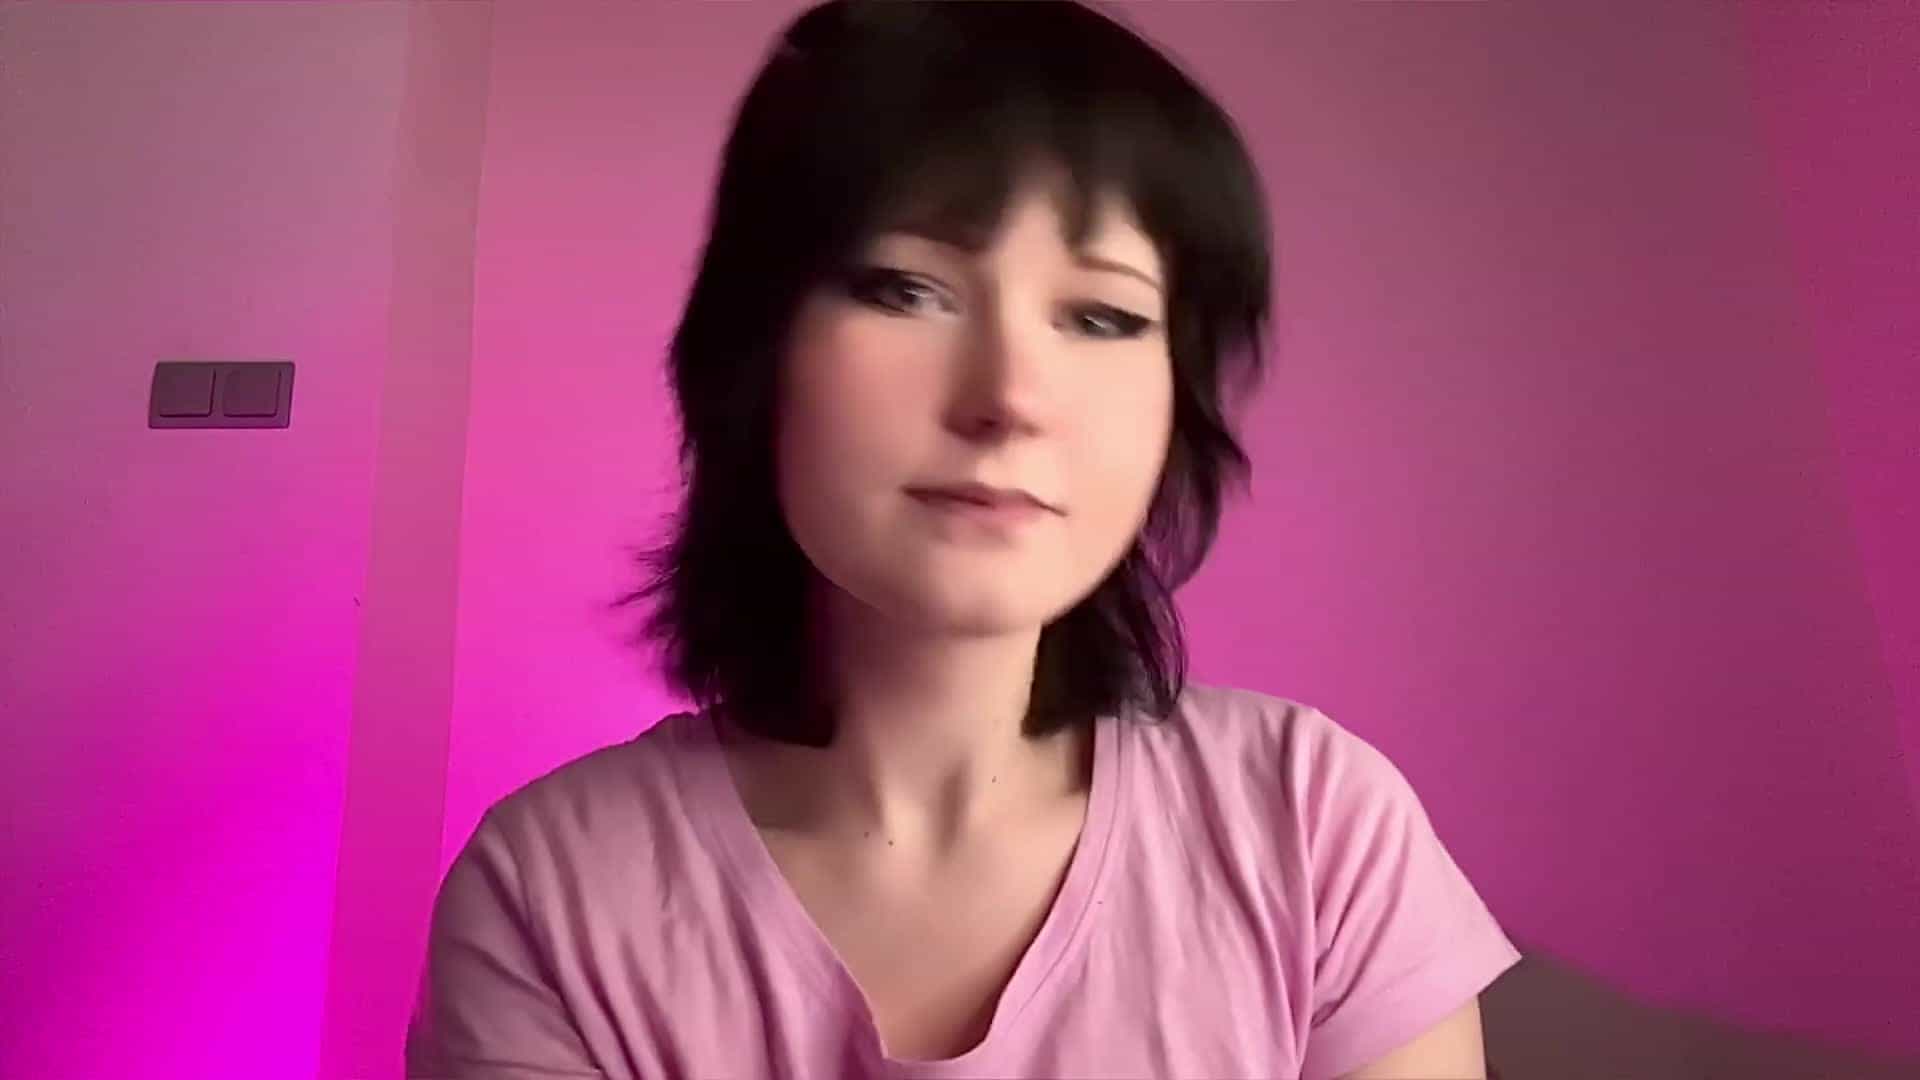 Would you let a cute trans girl empty her balls into your mouth?